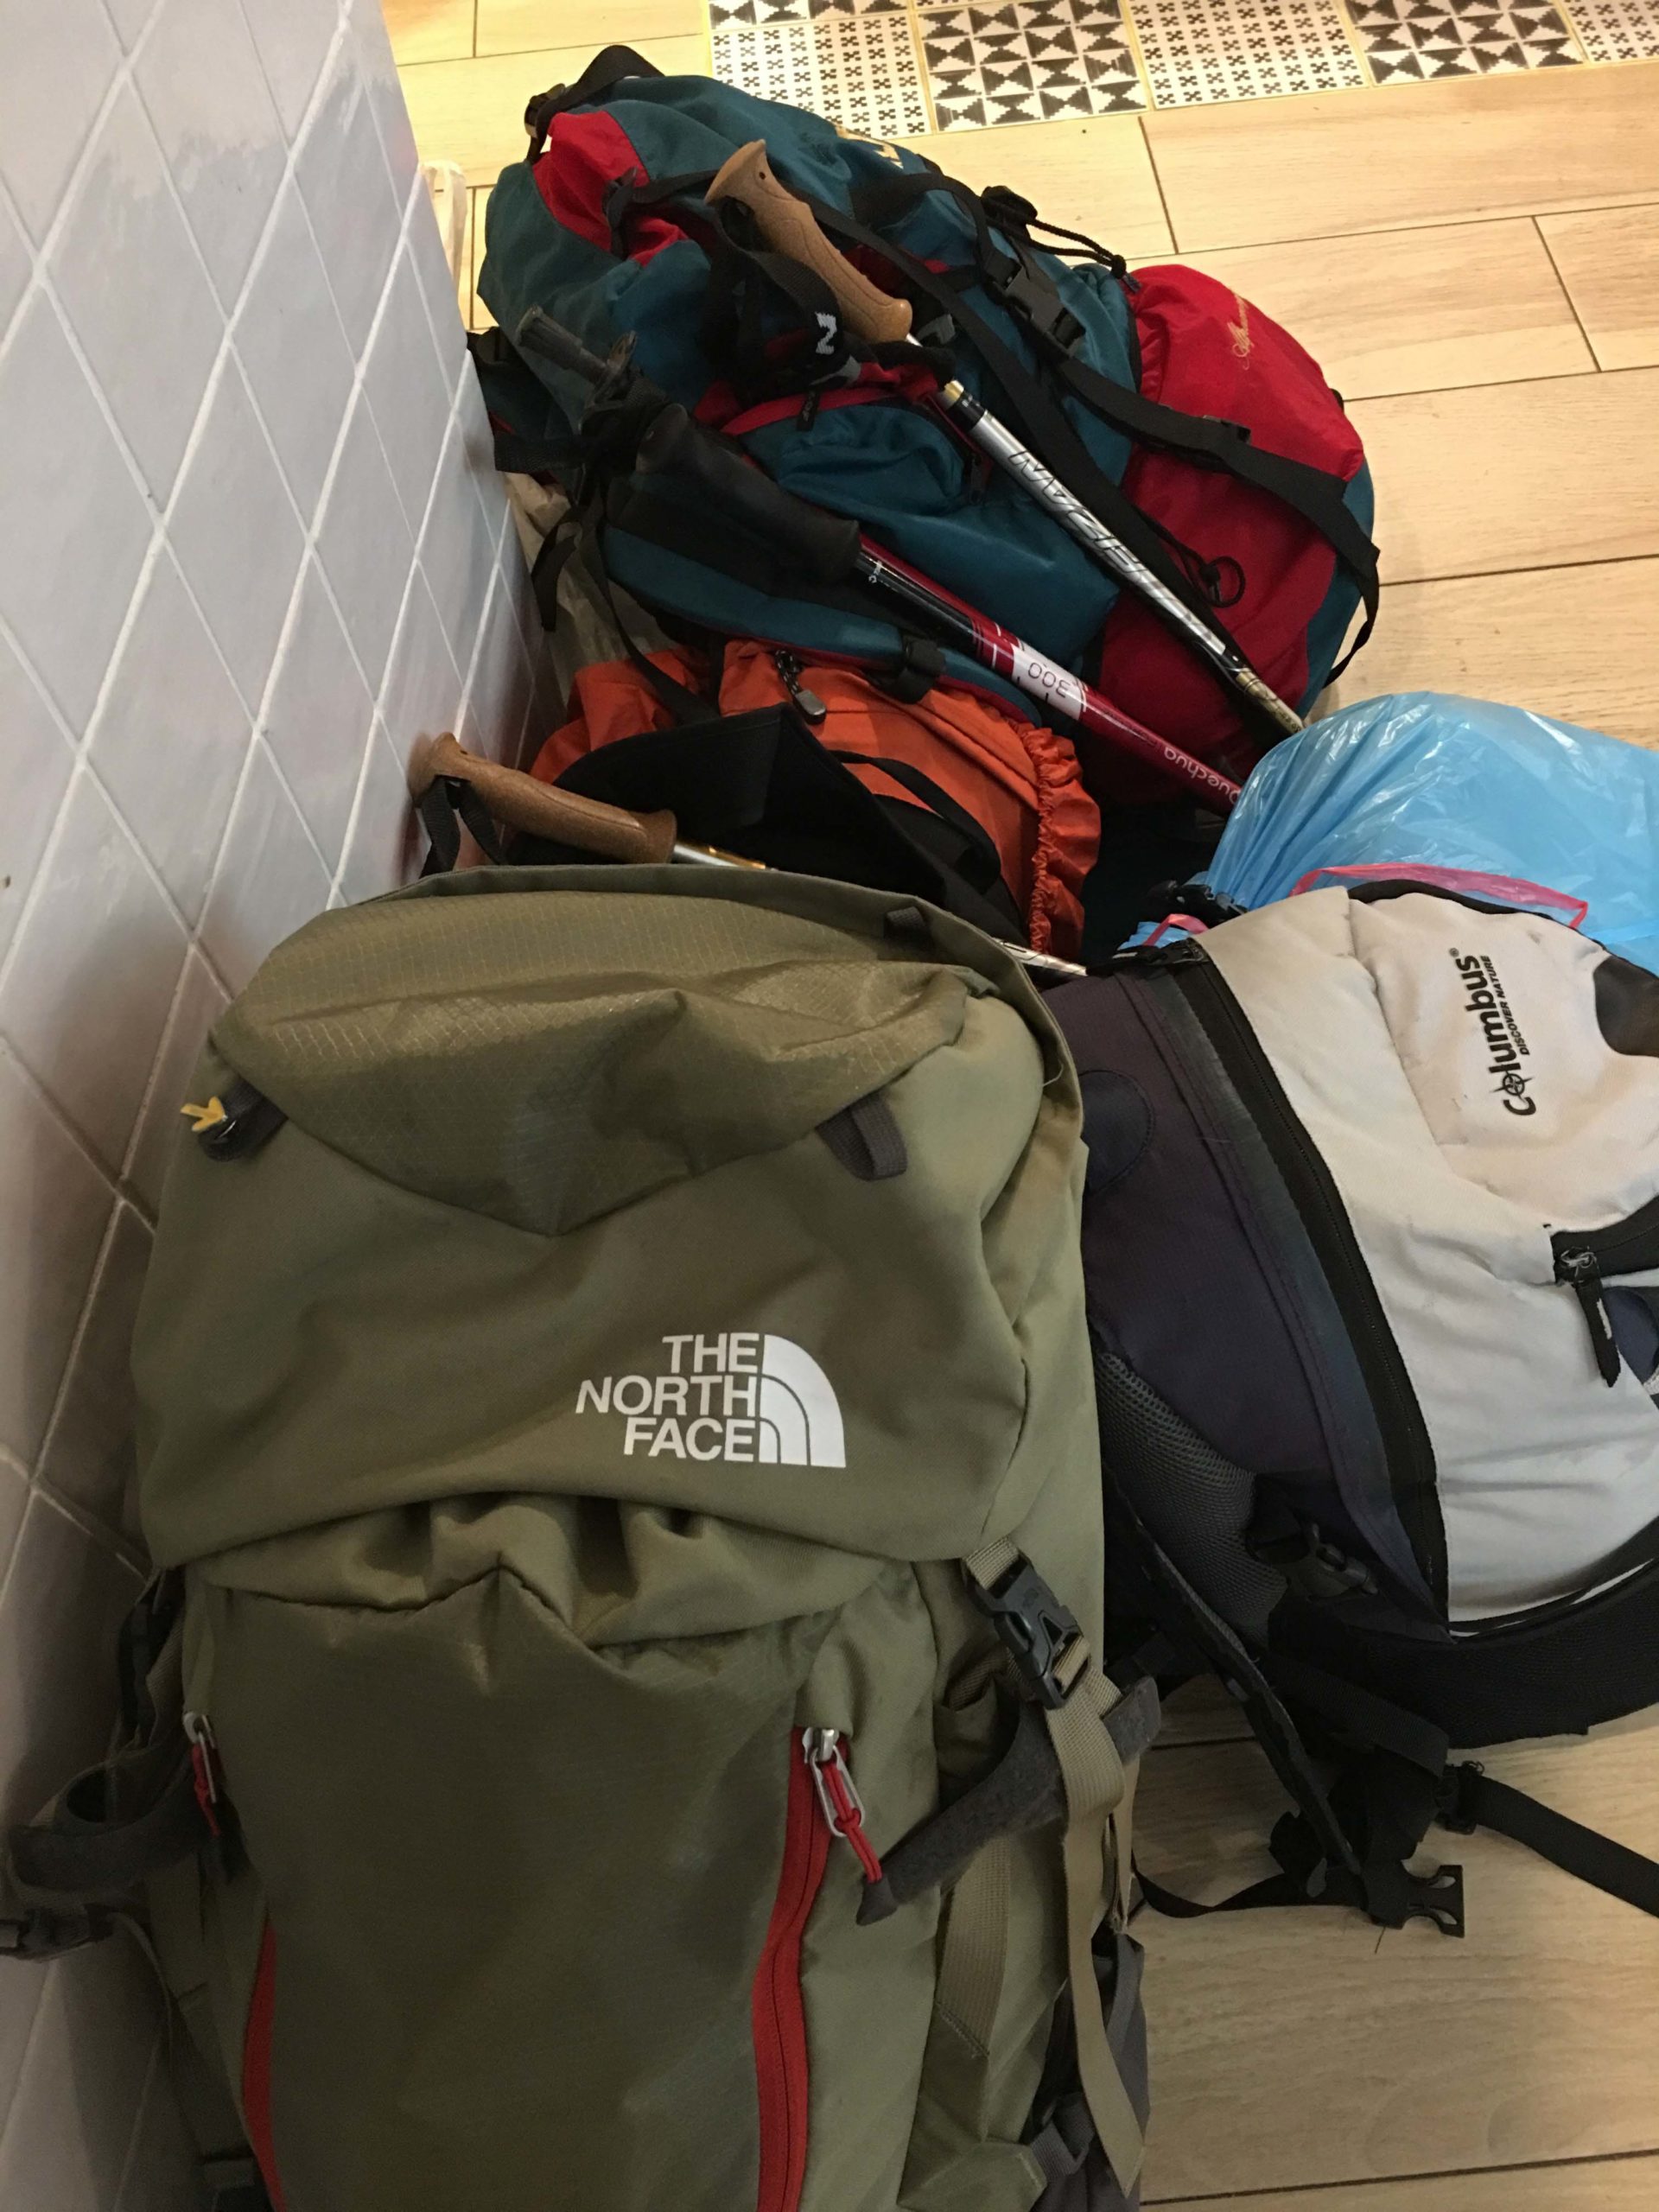 The transport of backpacks on the Portuguese Way